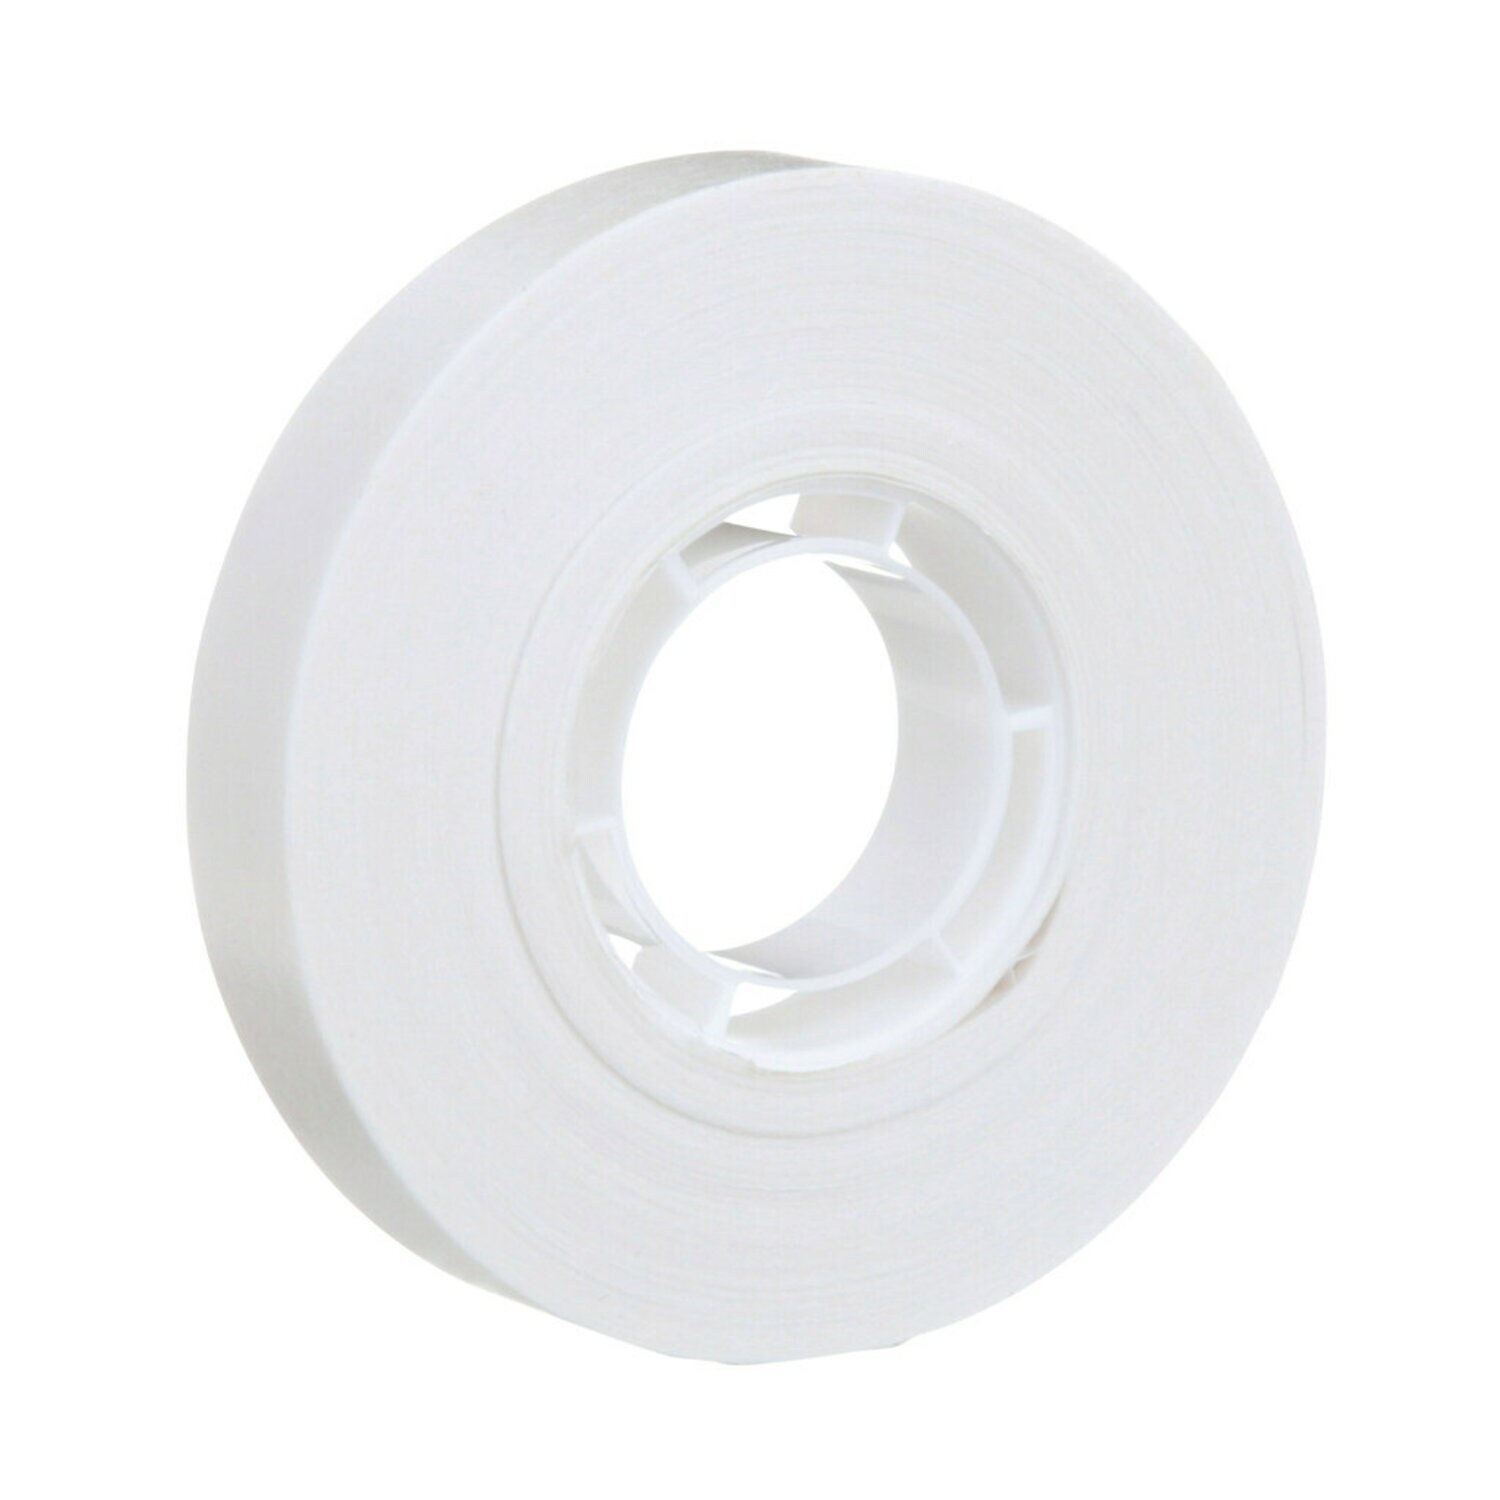 Adhesive tape -196 °C/+288 °C - Marking tapes - Health and safety 